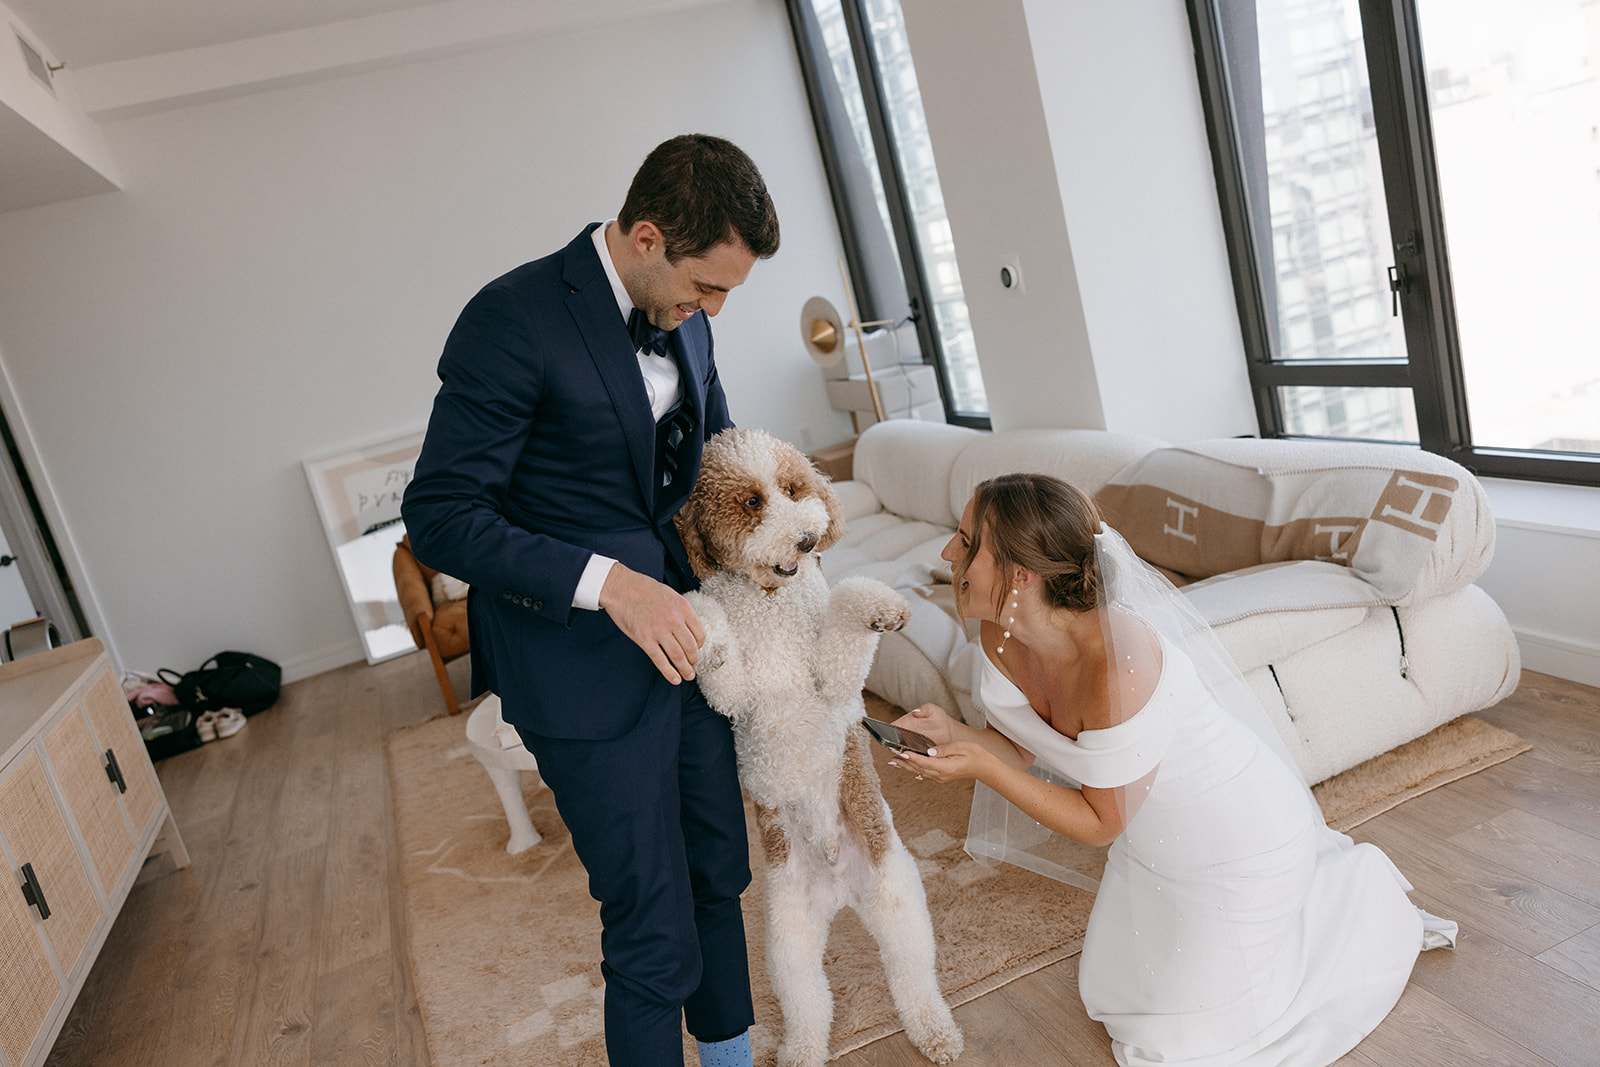 A bride and groom smiles with their dog during their wedding day in NYC